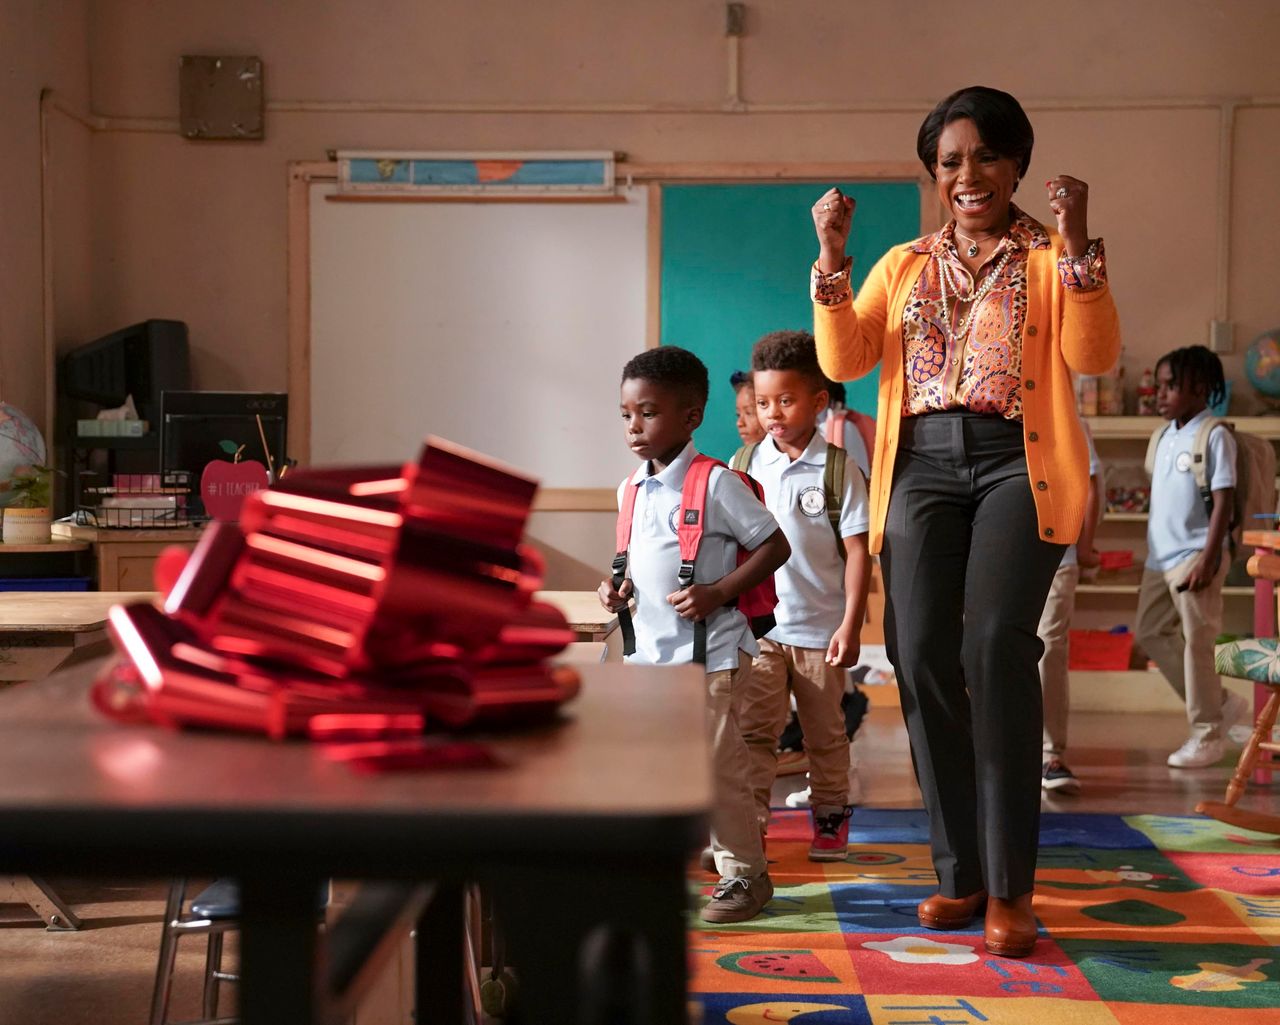 Sheryl Lee Ralph's Barbara Howard is hyped for a new school year on "Abbott Elementary."